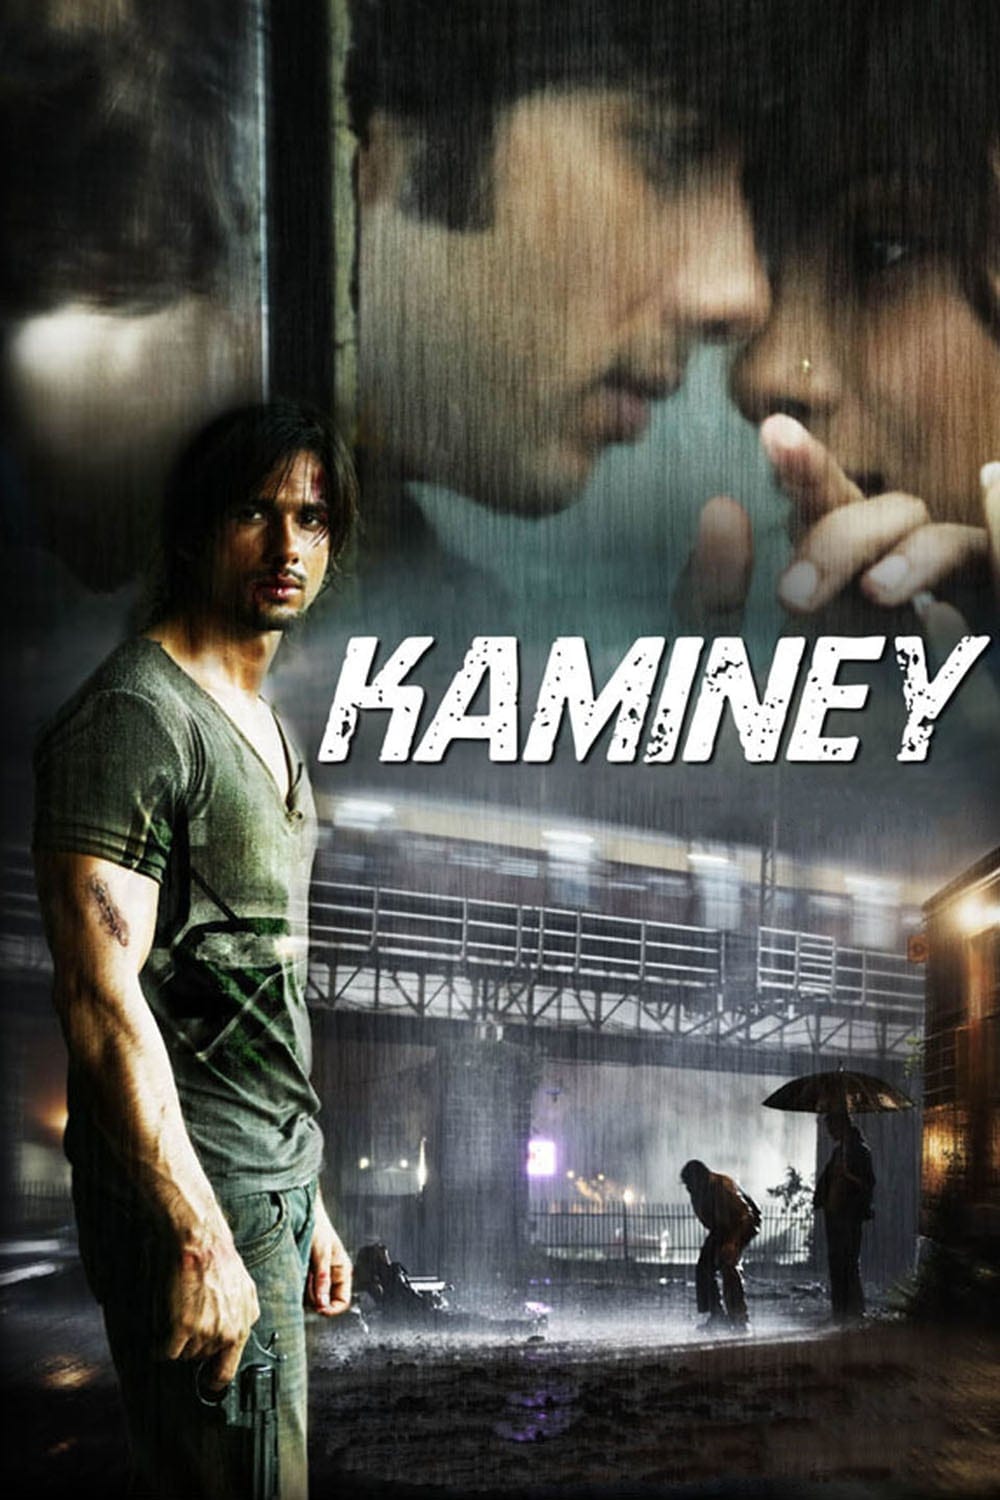 Poster for the movie "Kaminey"